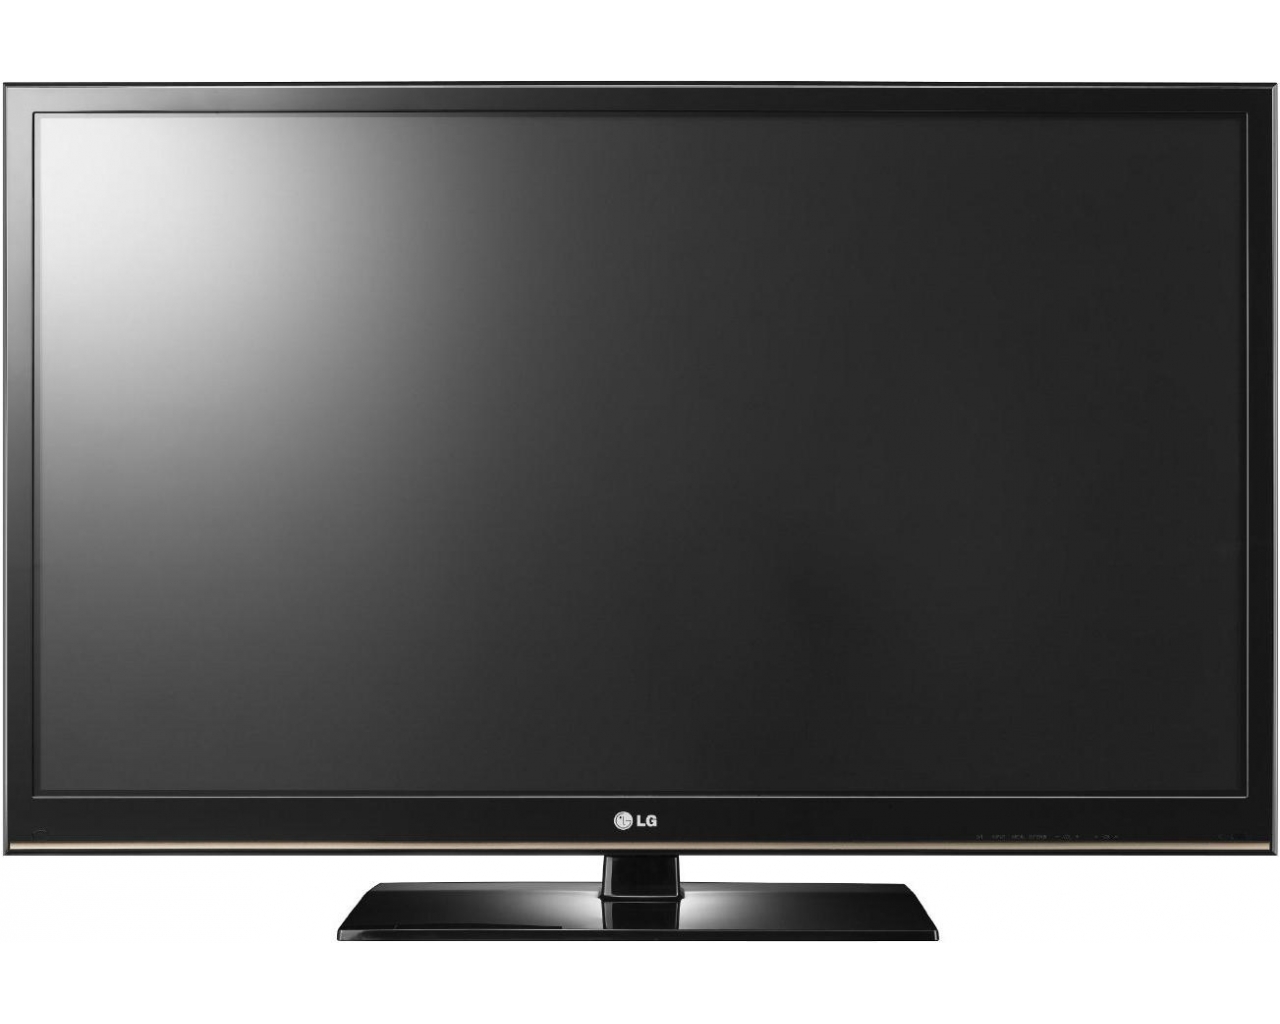 Should I repair or replace my LED/LCD TV in 2019